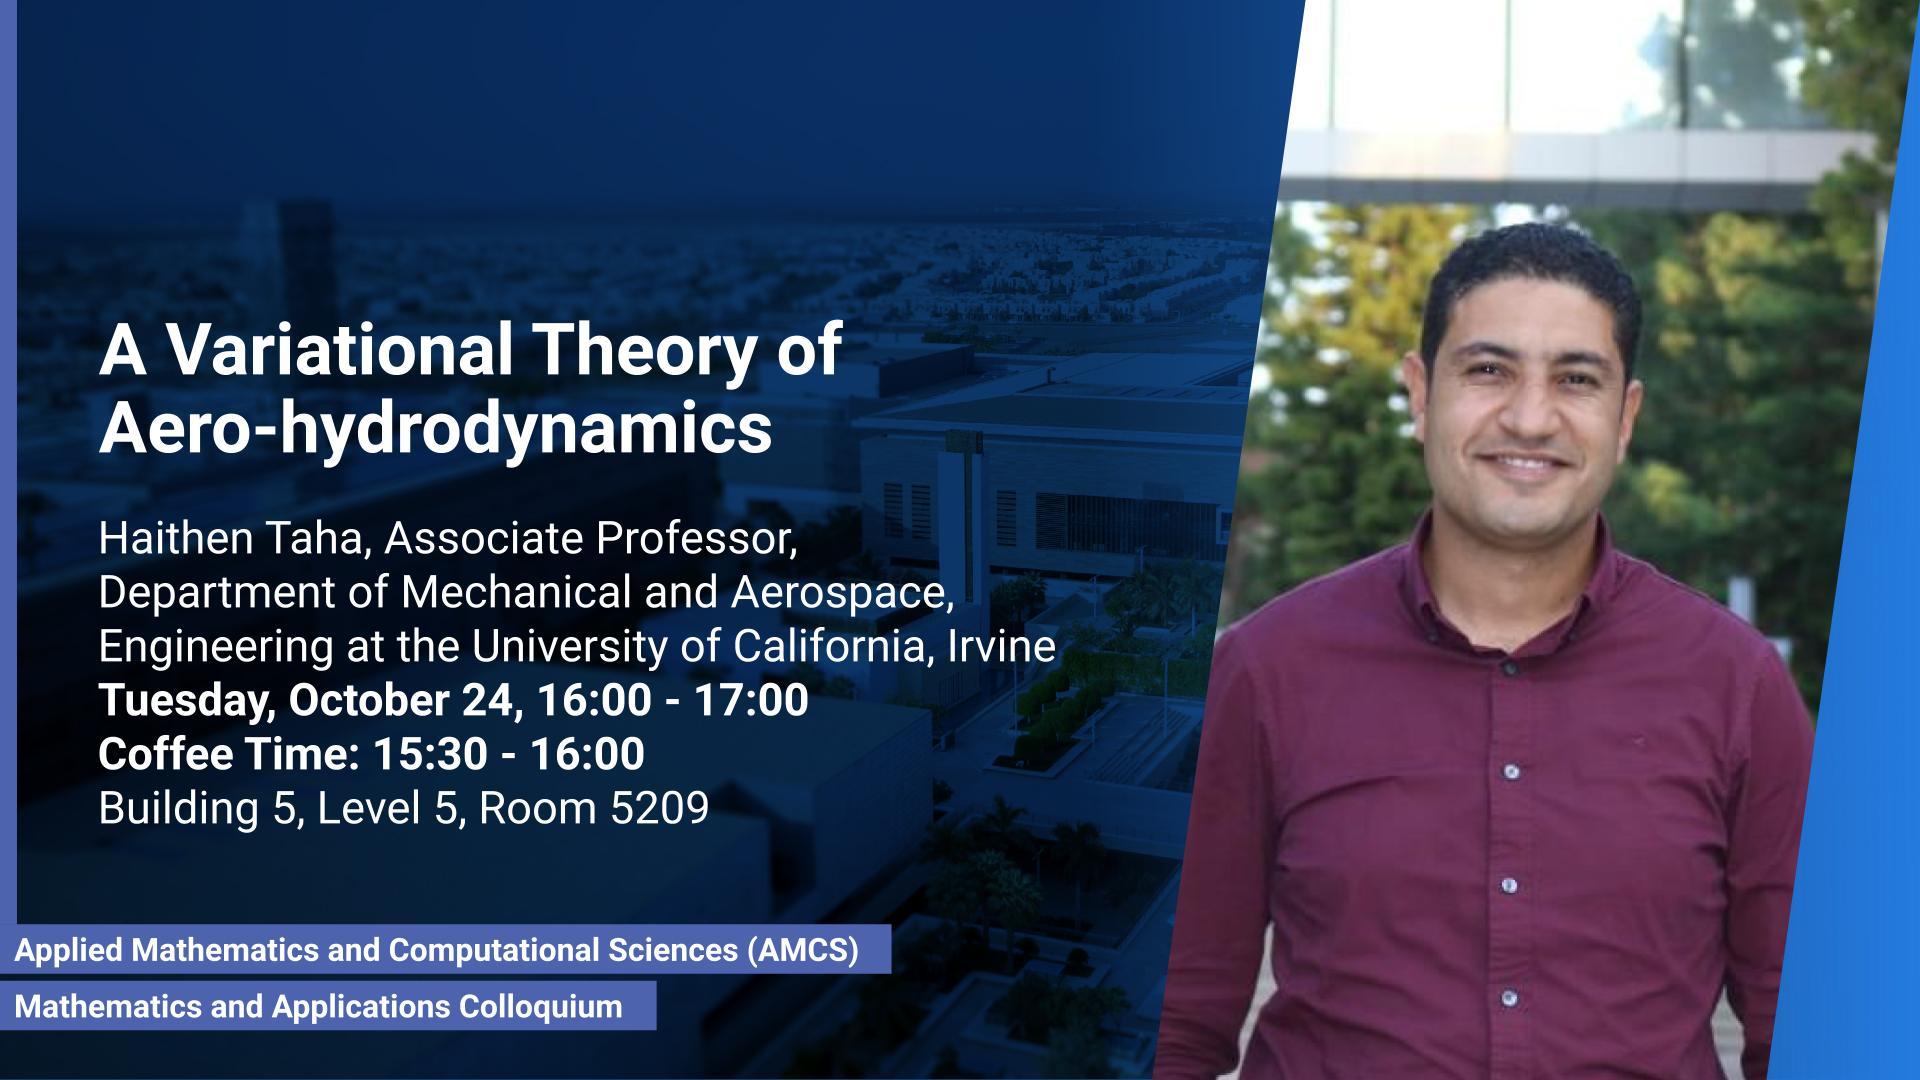 KAUST-CEMSE-AMCS-Mathematic-and Application-Colloquium-A-Variational-Theory-of-Aero-hydrodynamics